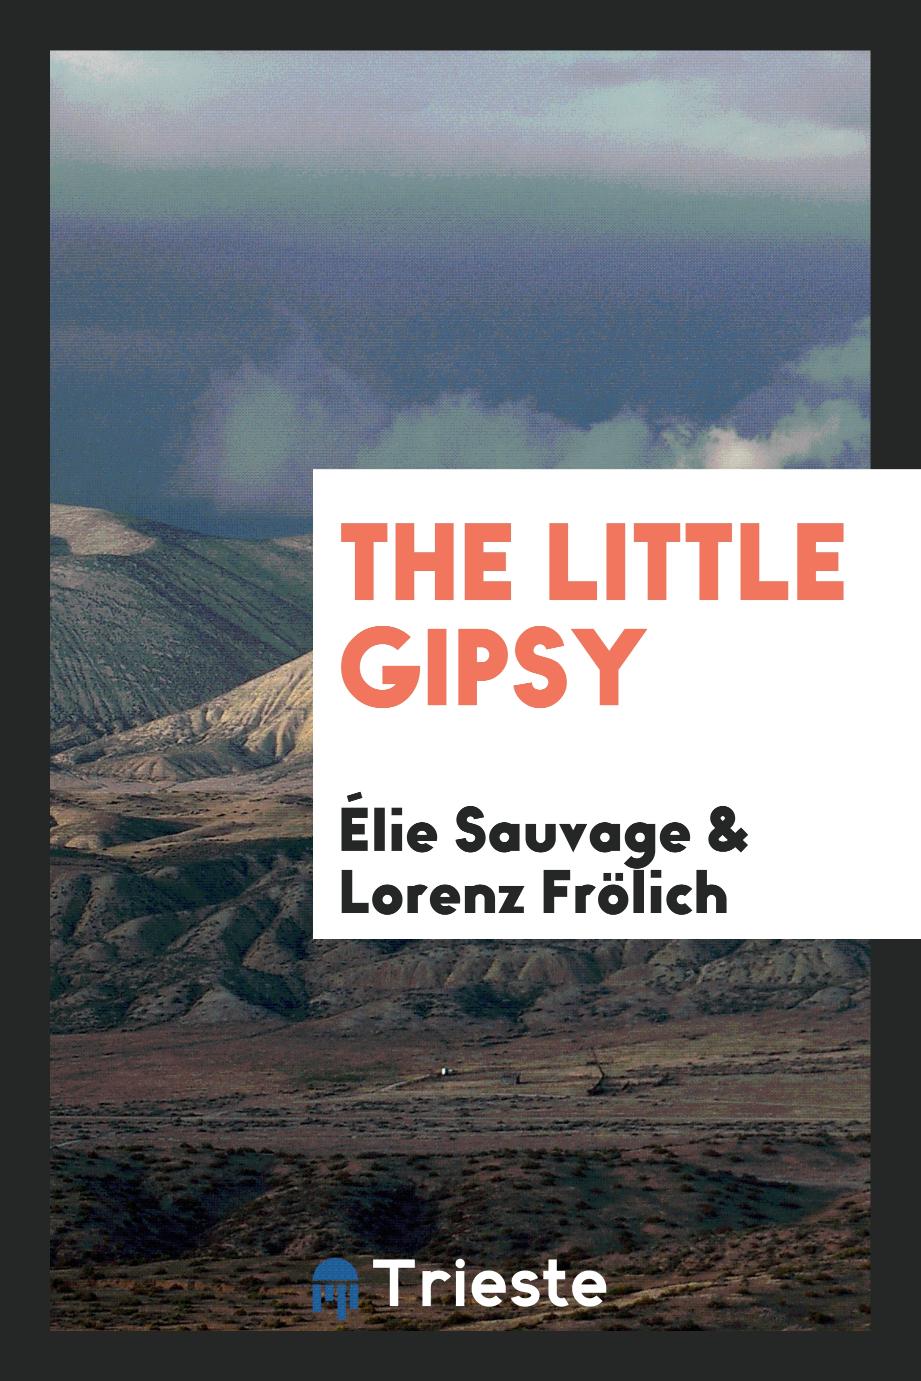 The Little Gipsy